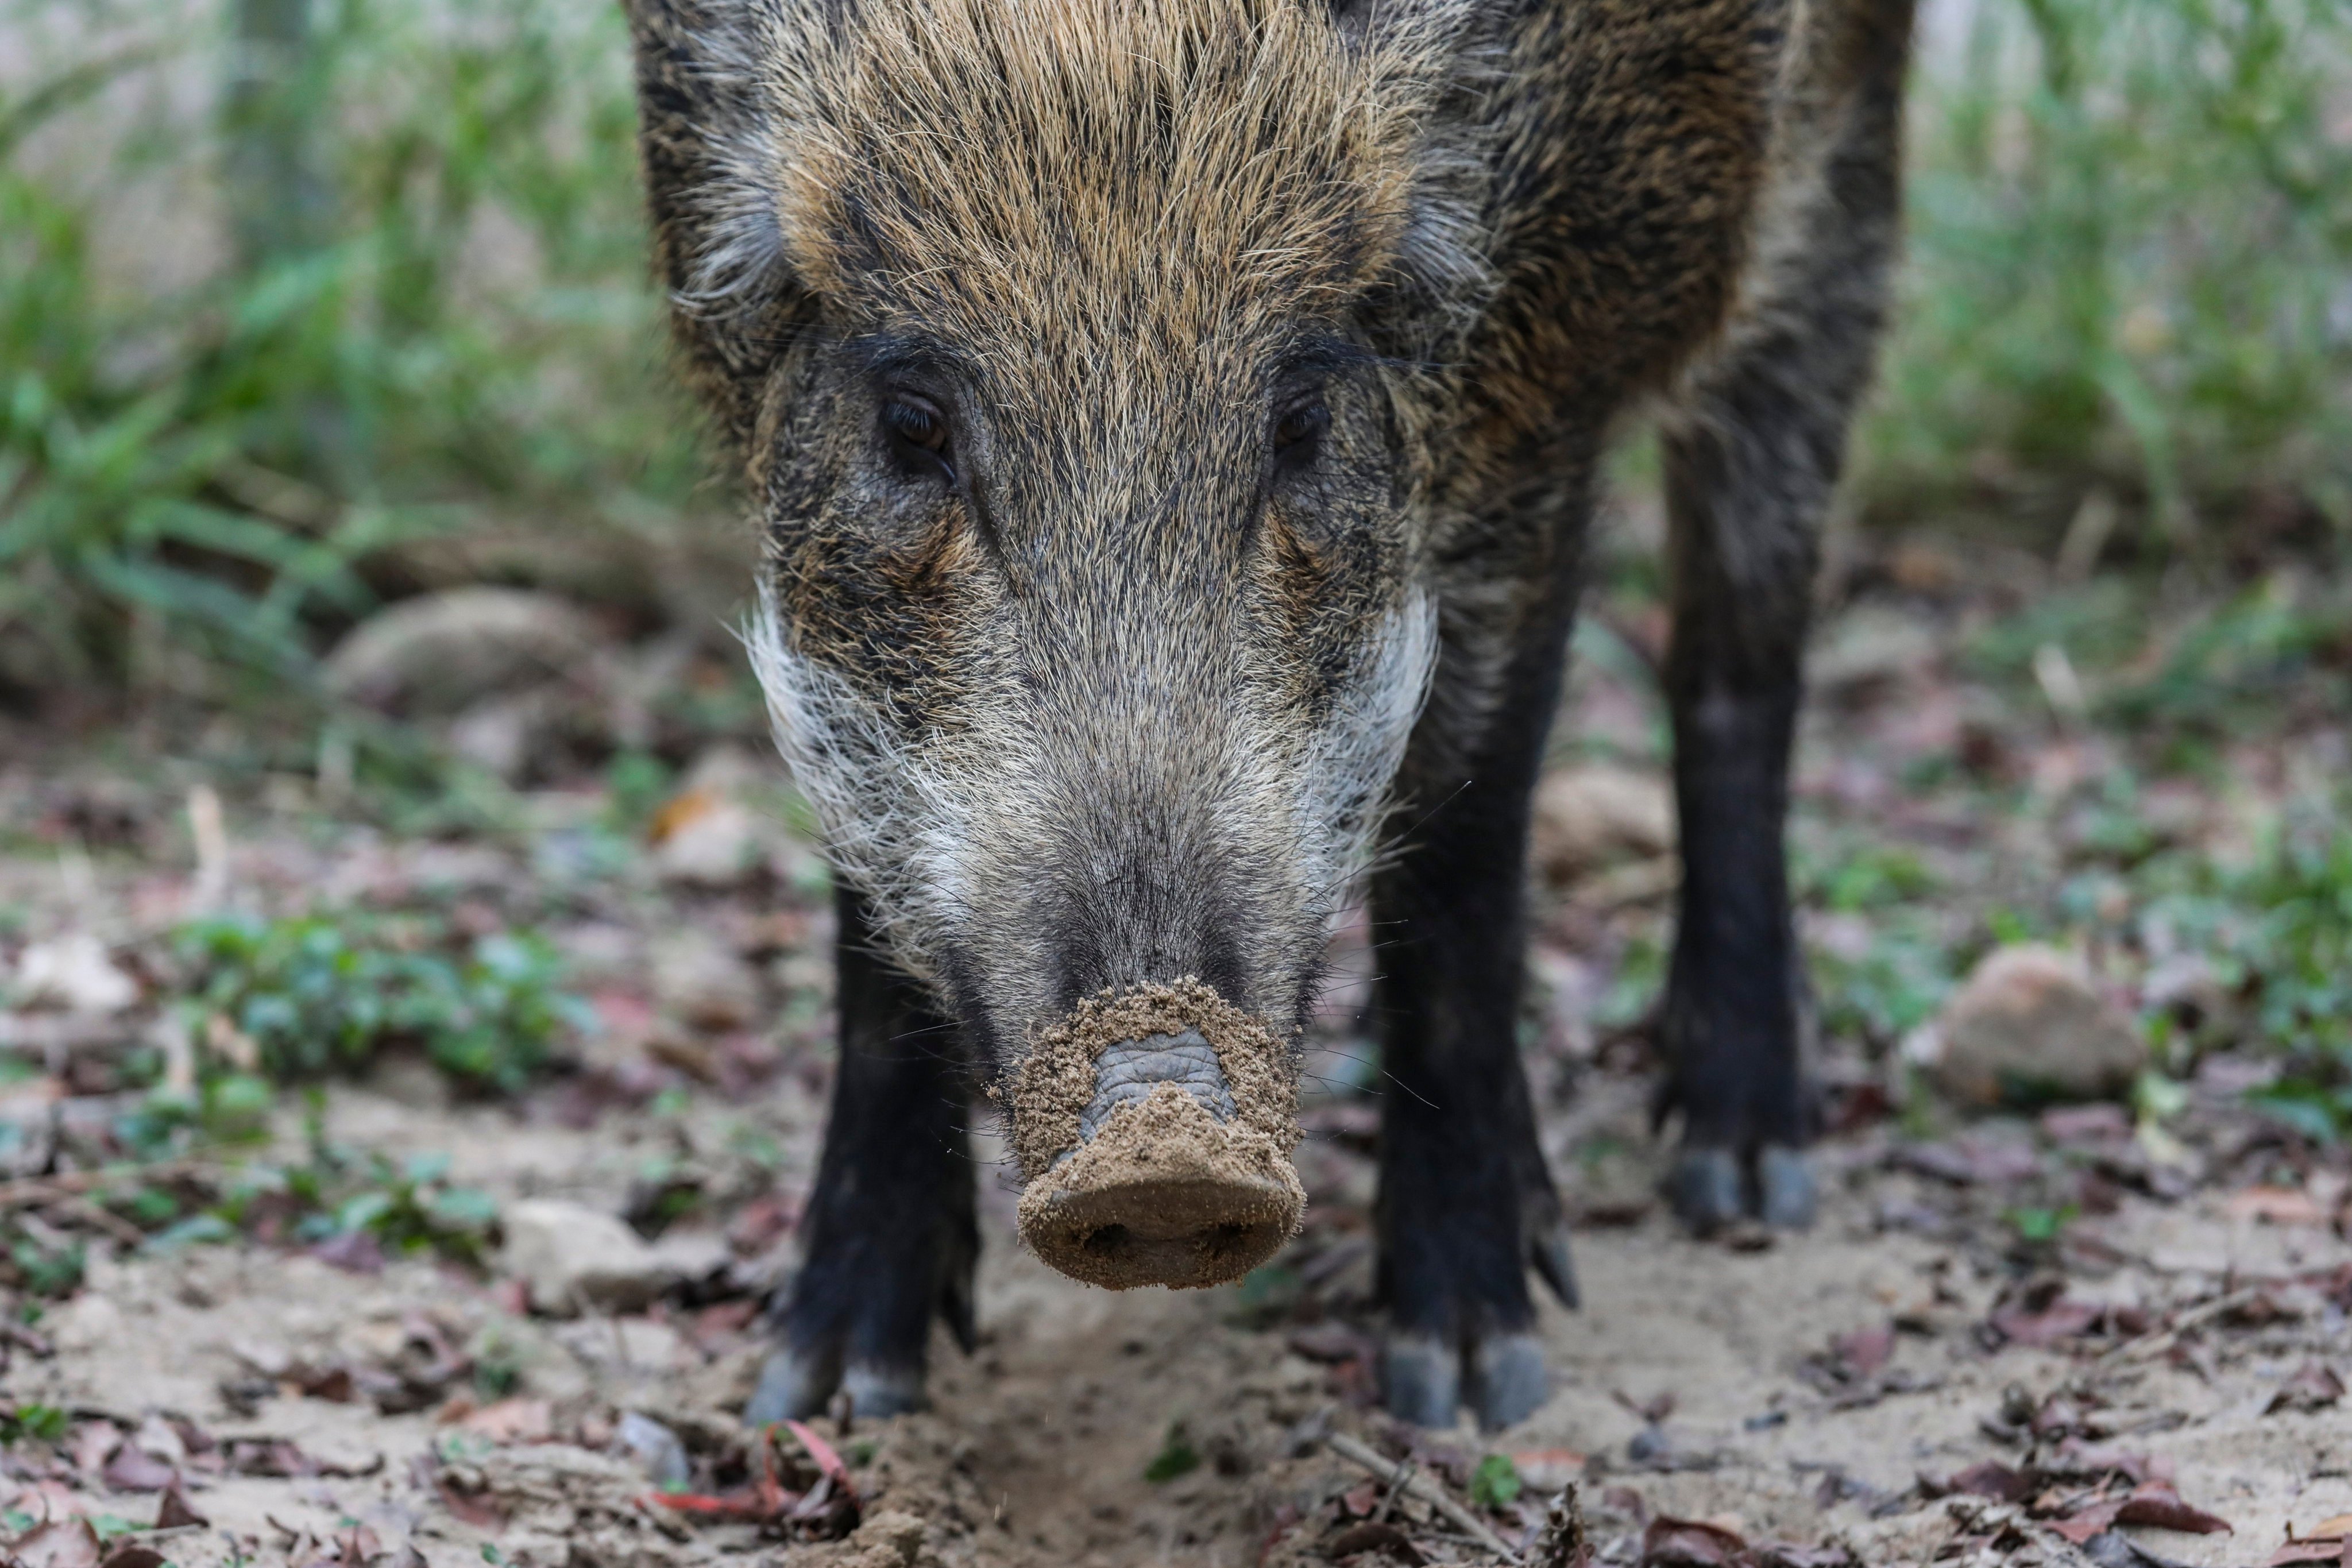 WIld boars are only likely to attack humans if scared or injured, experts say. Photo: Felix Wong